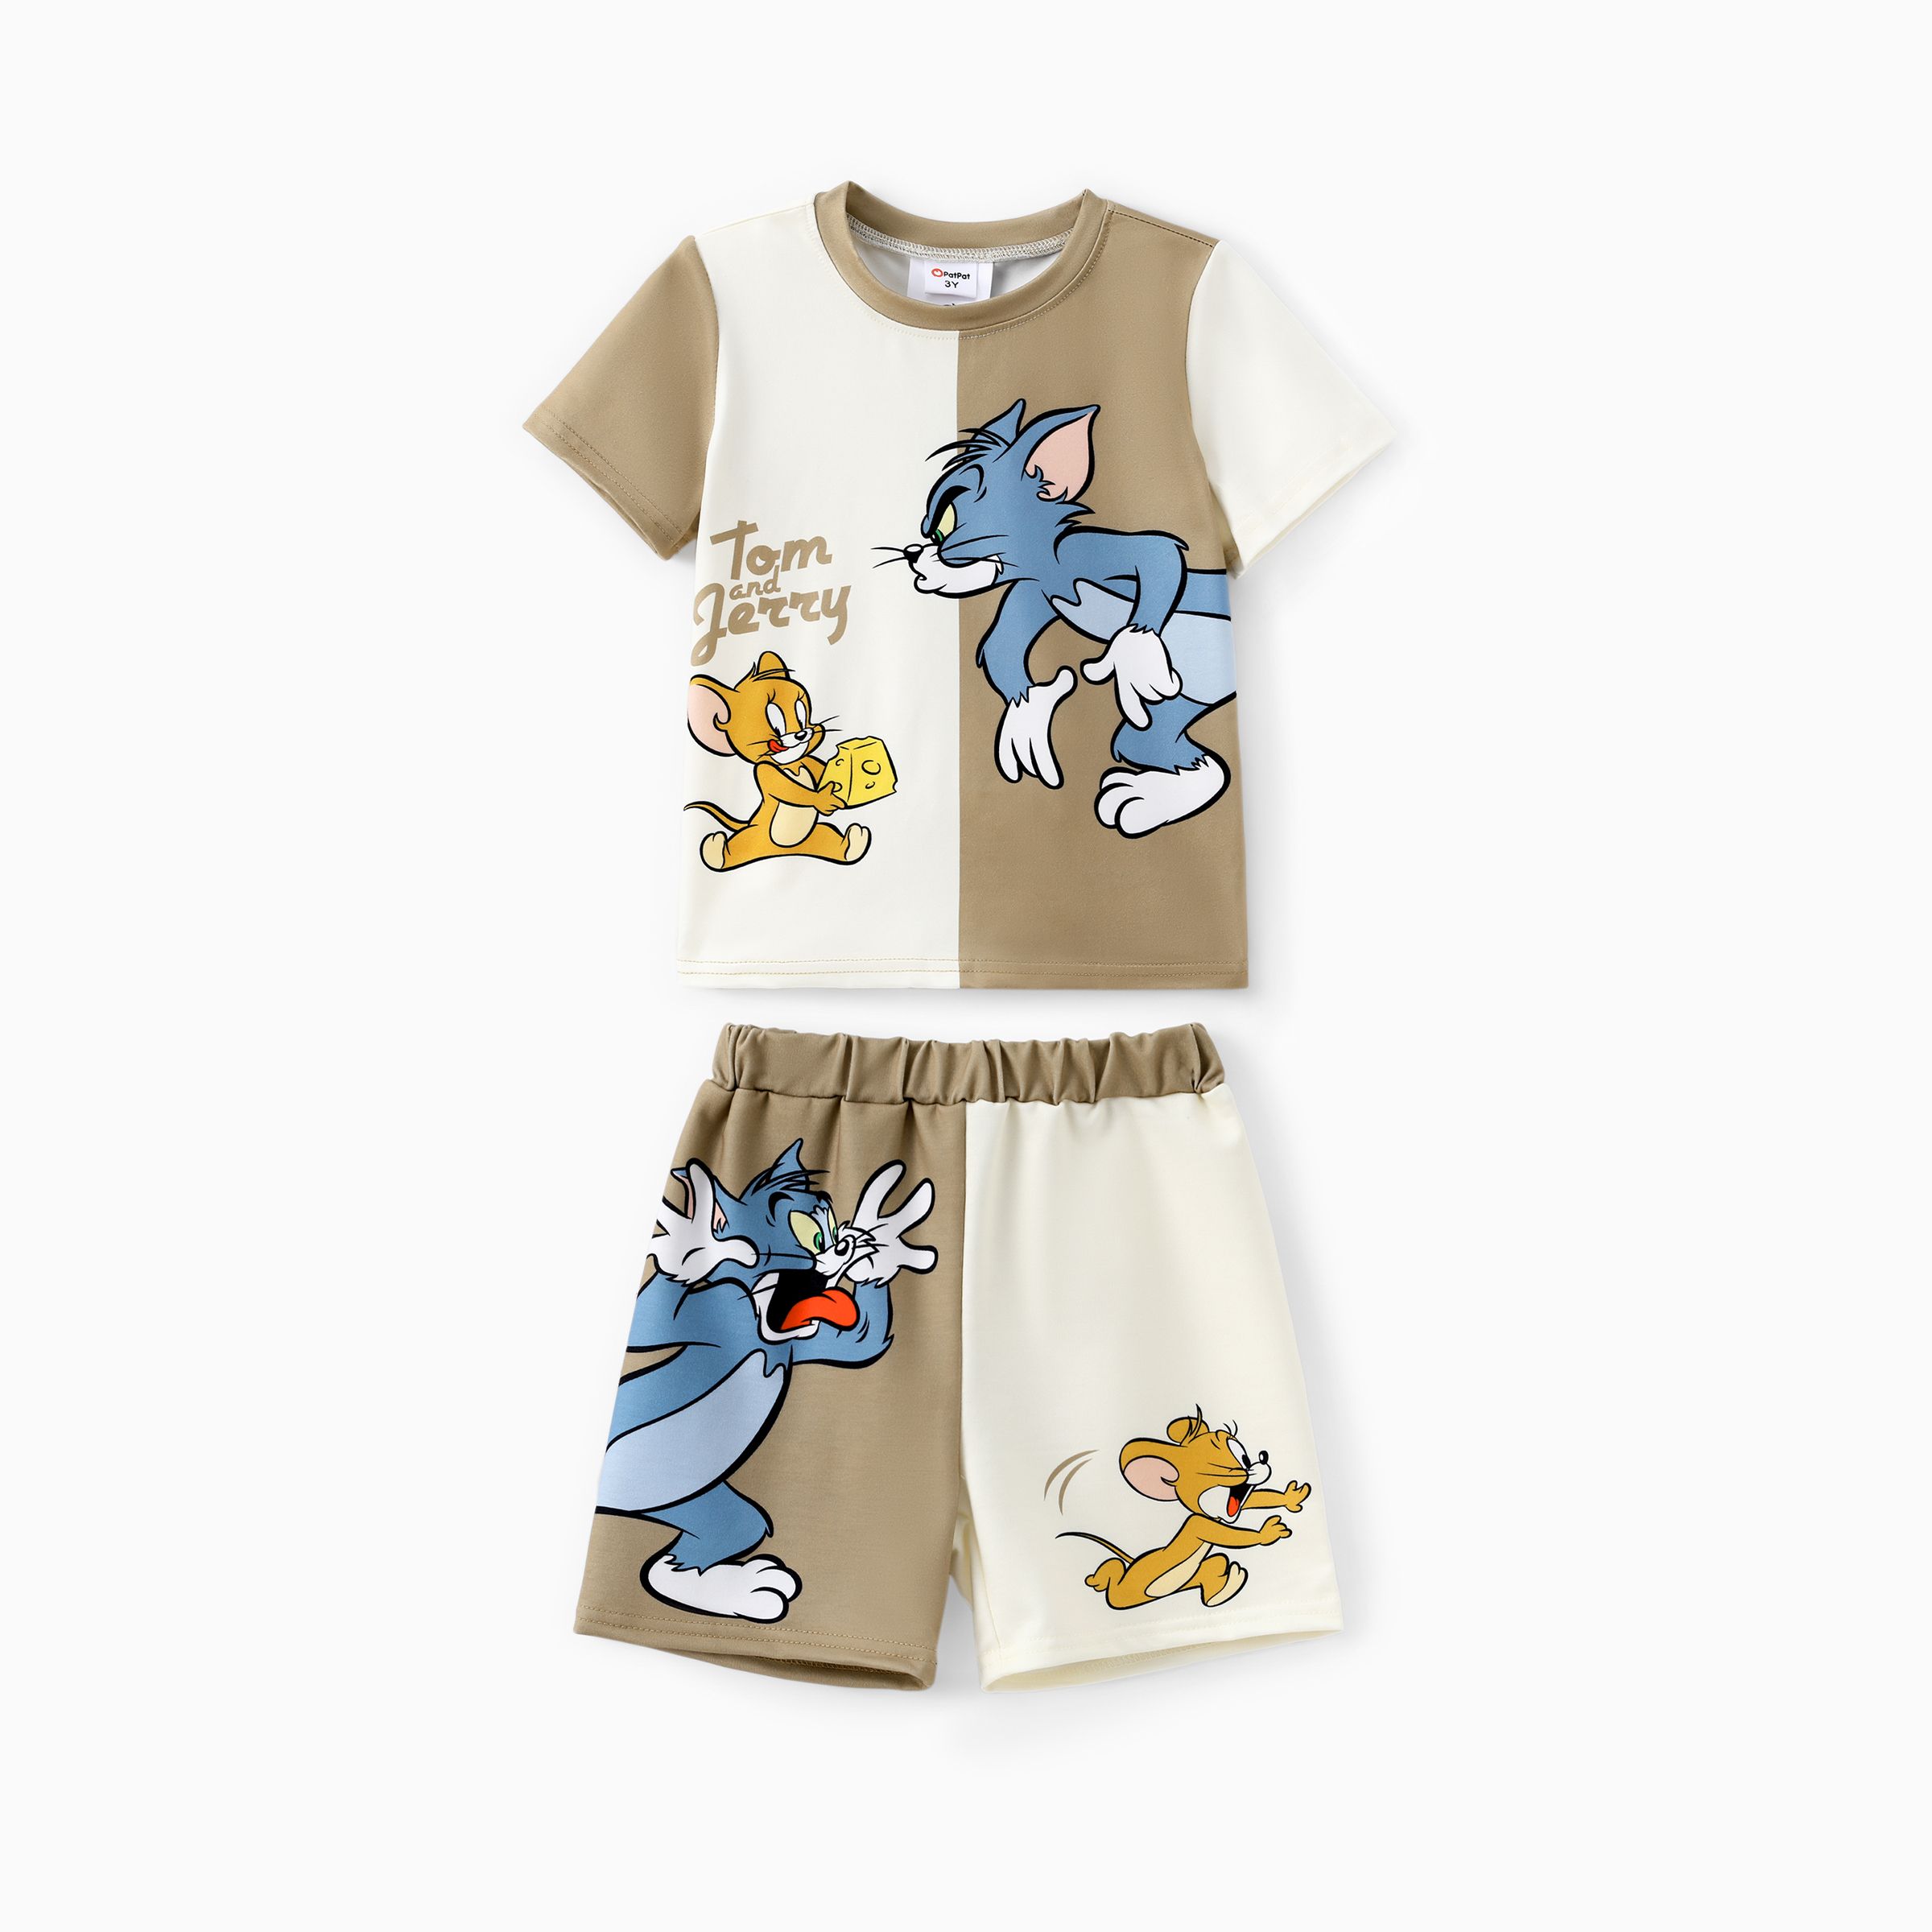 

Tom and Jerry Toddler Boys 2pcs Colorblock Funny Character Print Tee and Shorts Set